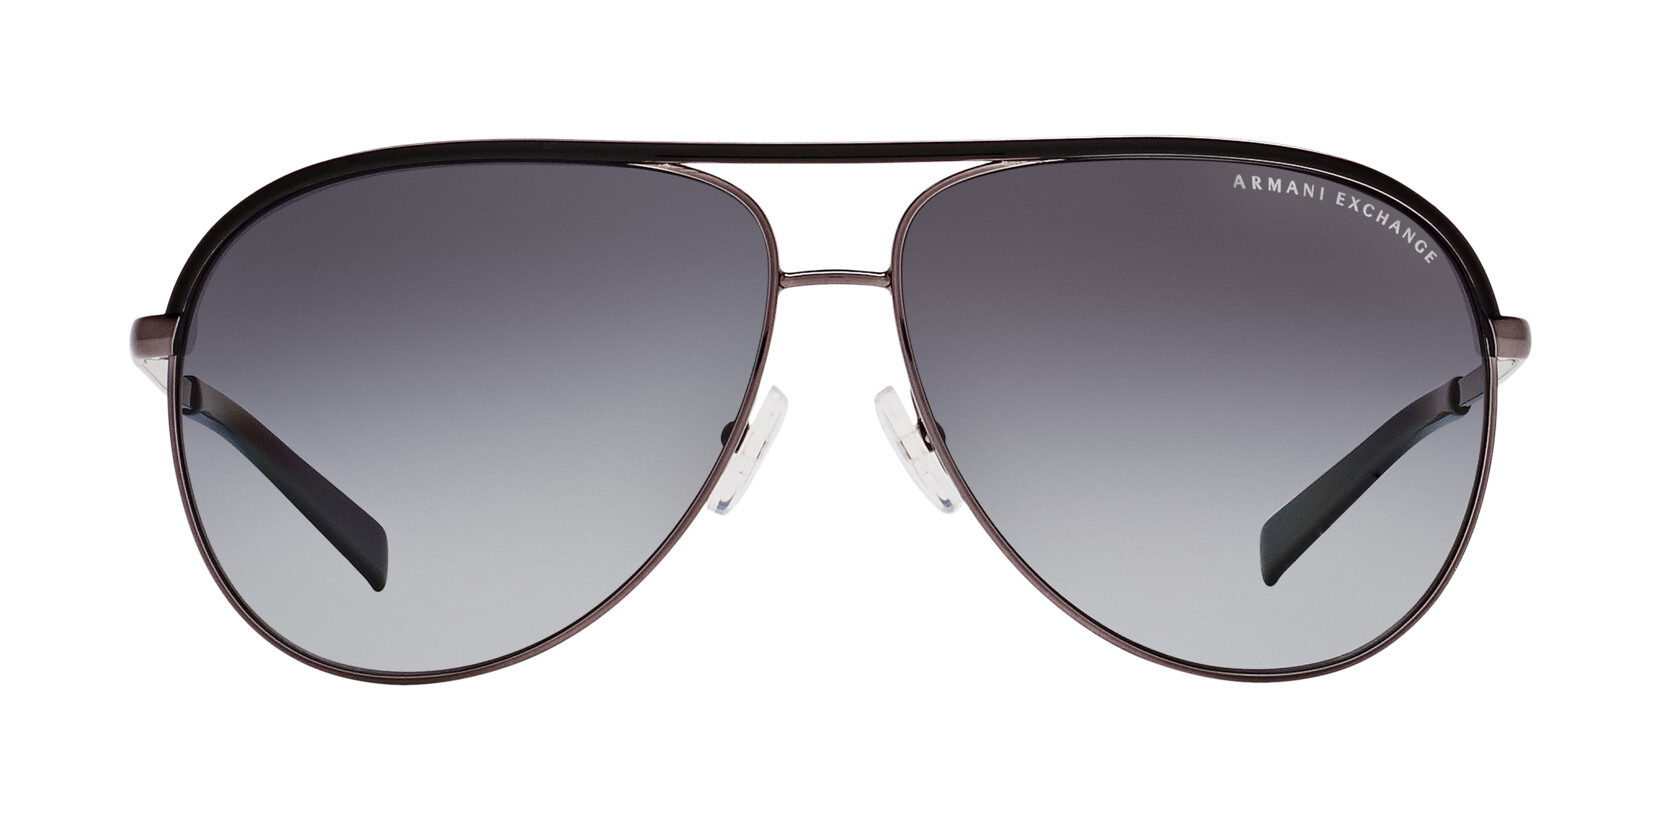 [products.image.front] Armani Exchange 0AX2002 6006T3 Sonnenbrille